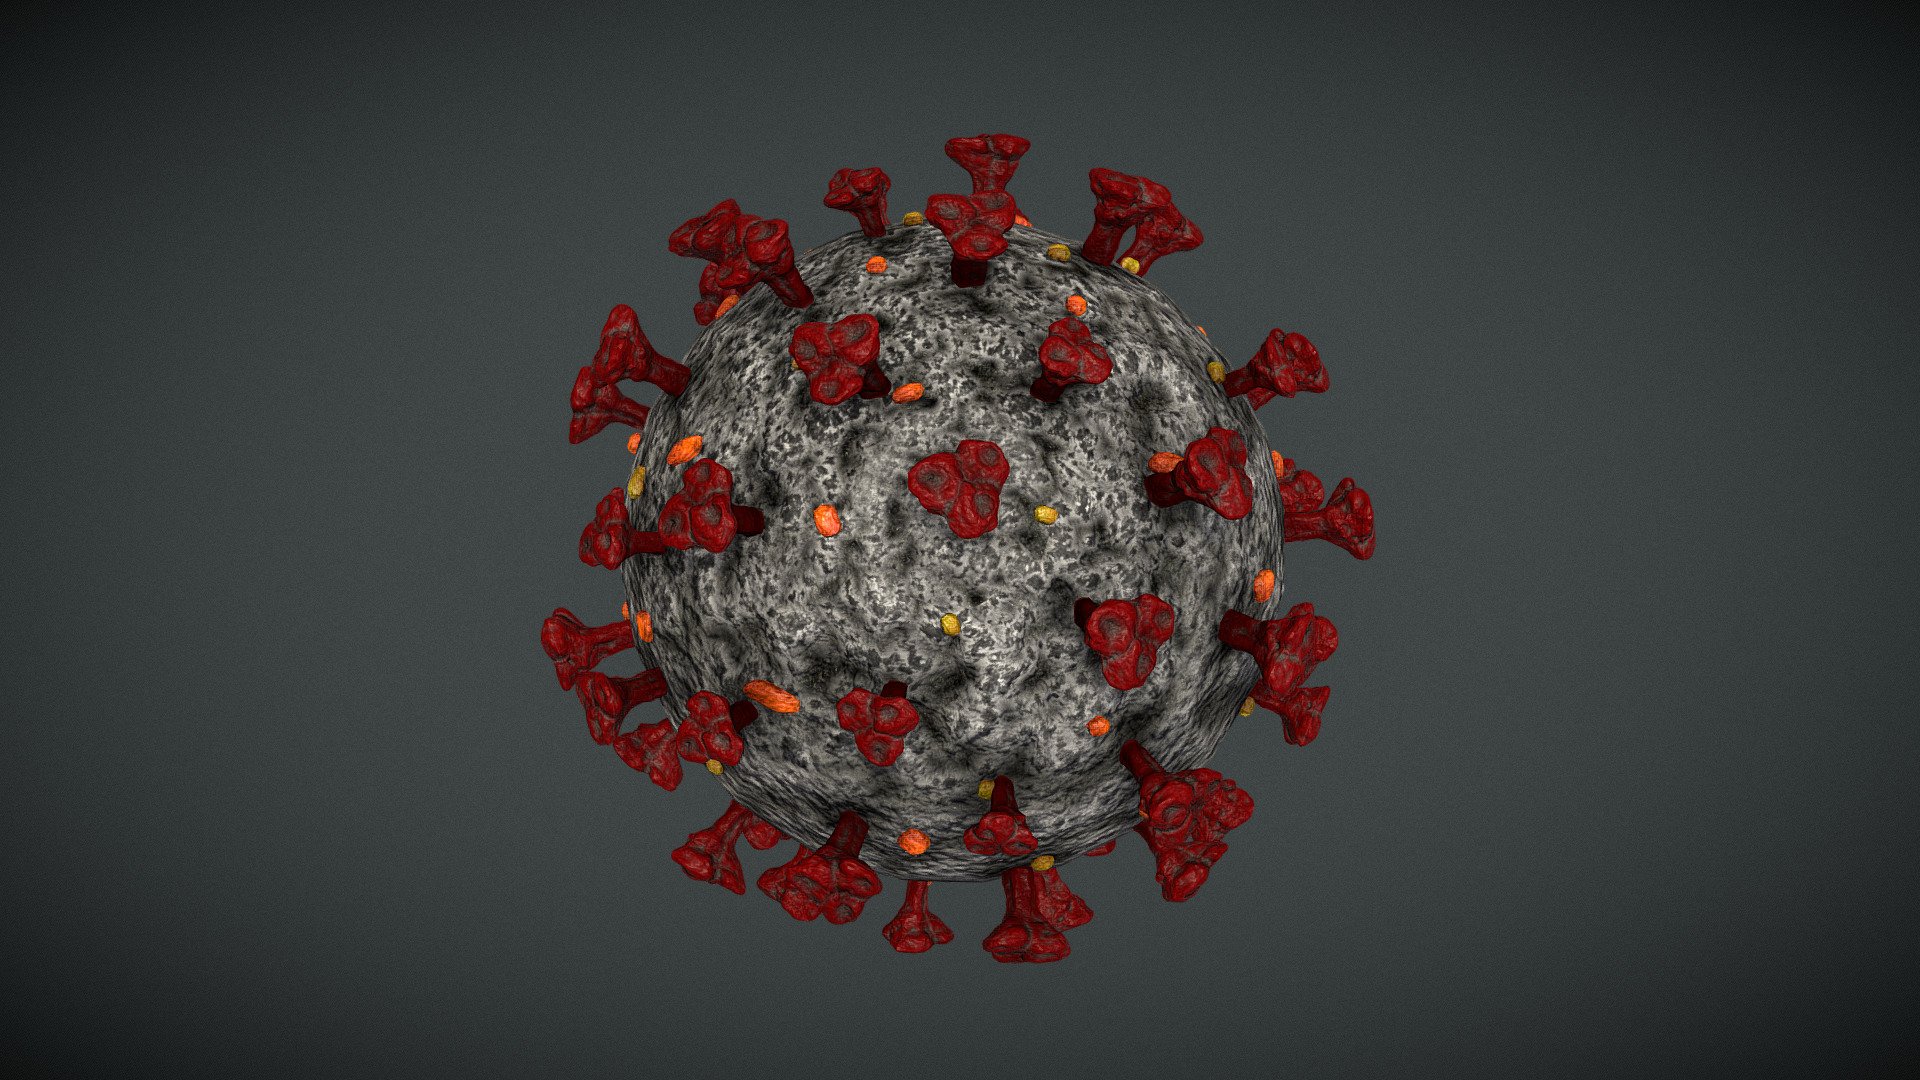 NEW UPDATE (11.08.2021)
-Added 4k textures,blender file,unreal ready fbx 

Contains 4k PBR Textures (4) : 

Blender File
Unreal Ready FBX

https://www.artstation.com/artwork/g2rVPP


Coronavirus disease 2019 (COVID-19) is a contagious disease caused by severe acute respiratory syndrome coronavirus 2 (SARS-CoV-2). The first case was identified in Wuhan, China, in December 2019. It has since spread worldwide, leading to an ongoing pandemic 3d model